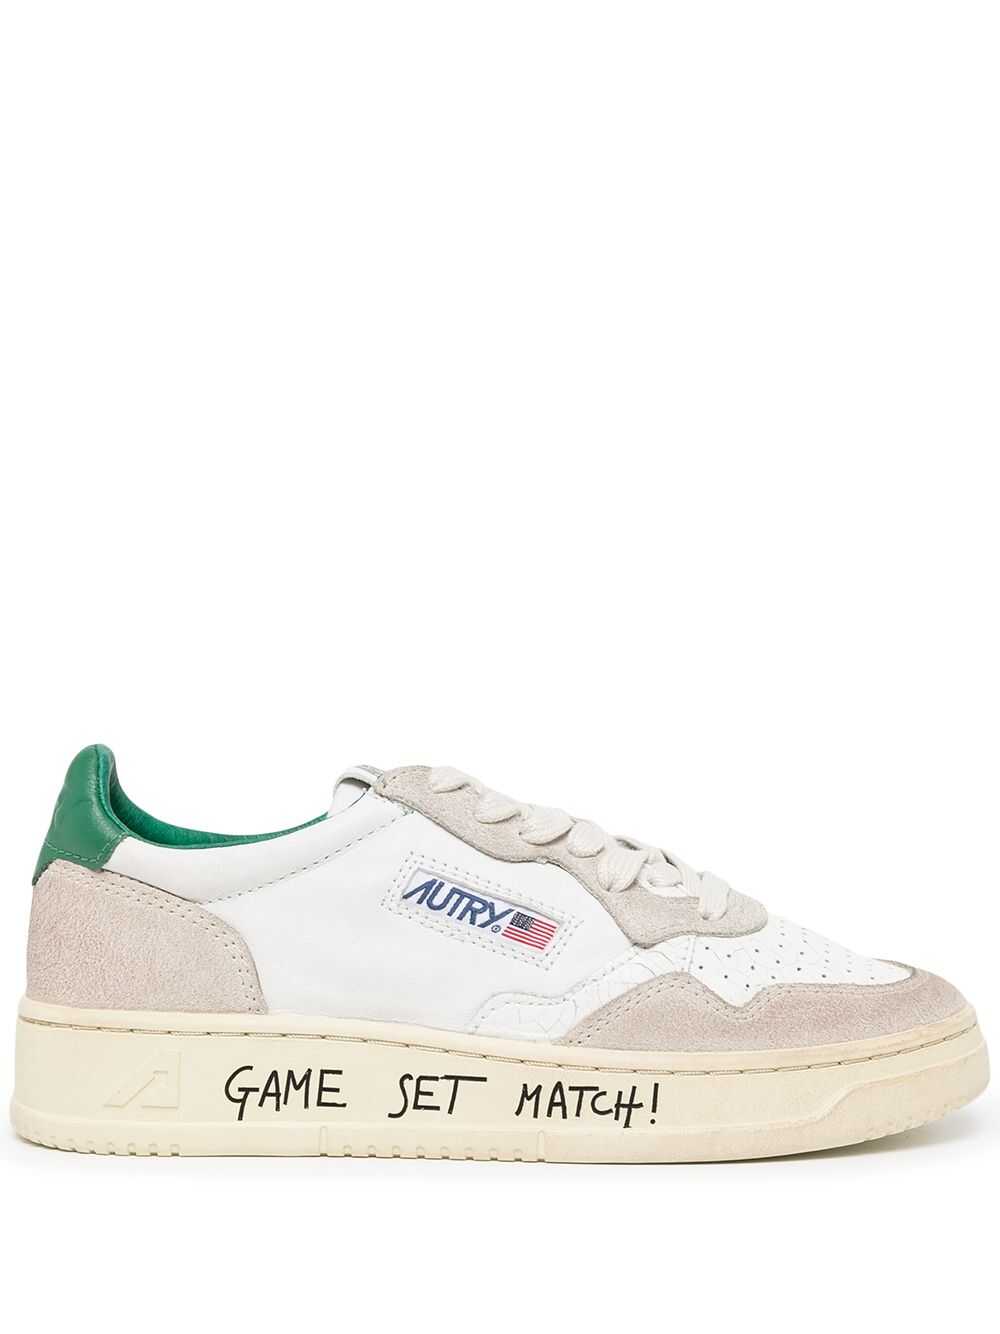 AUTRY Sneakers Green White image10